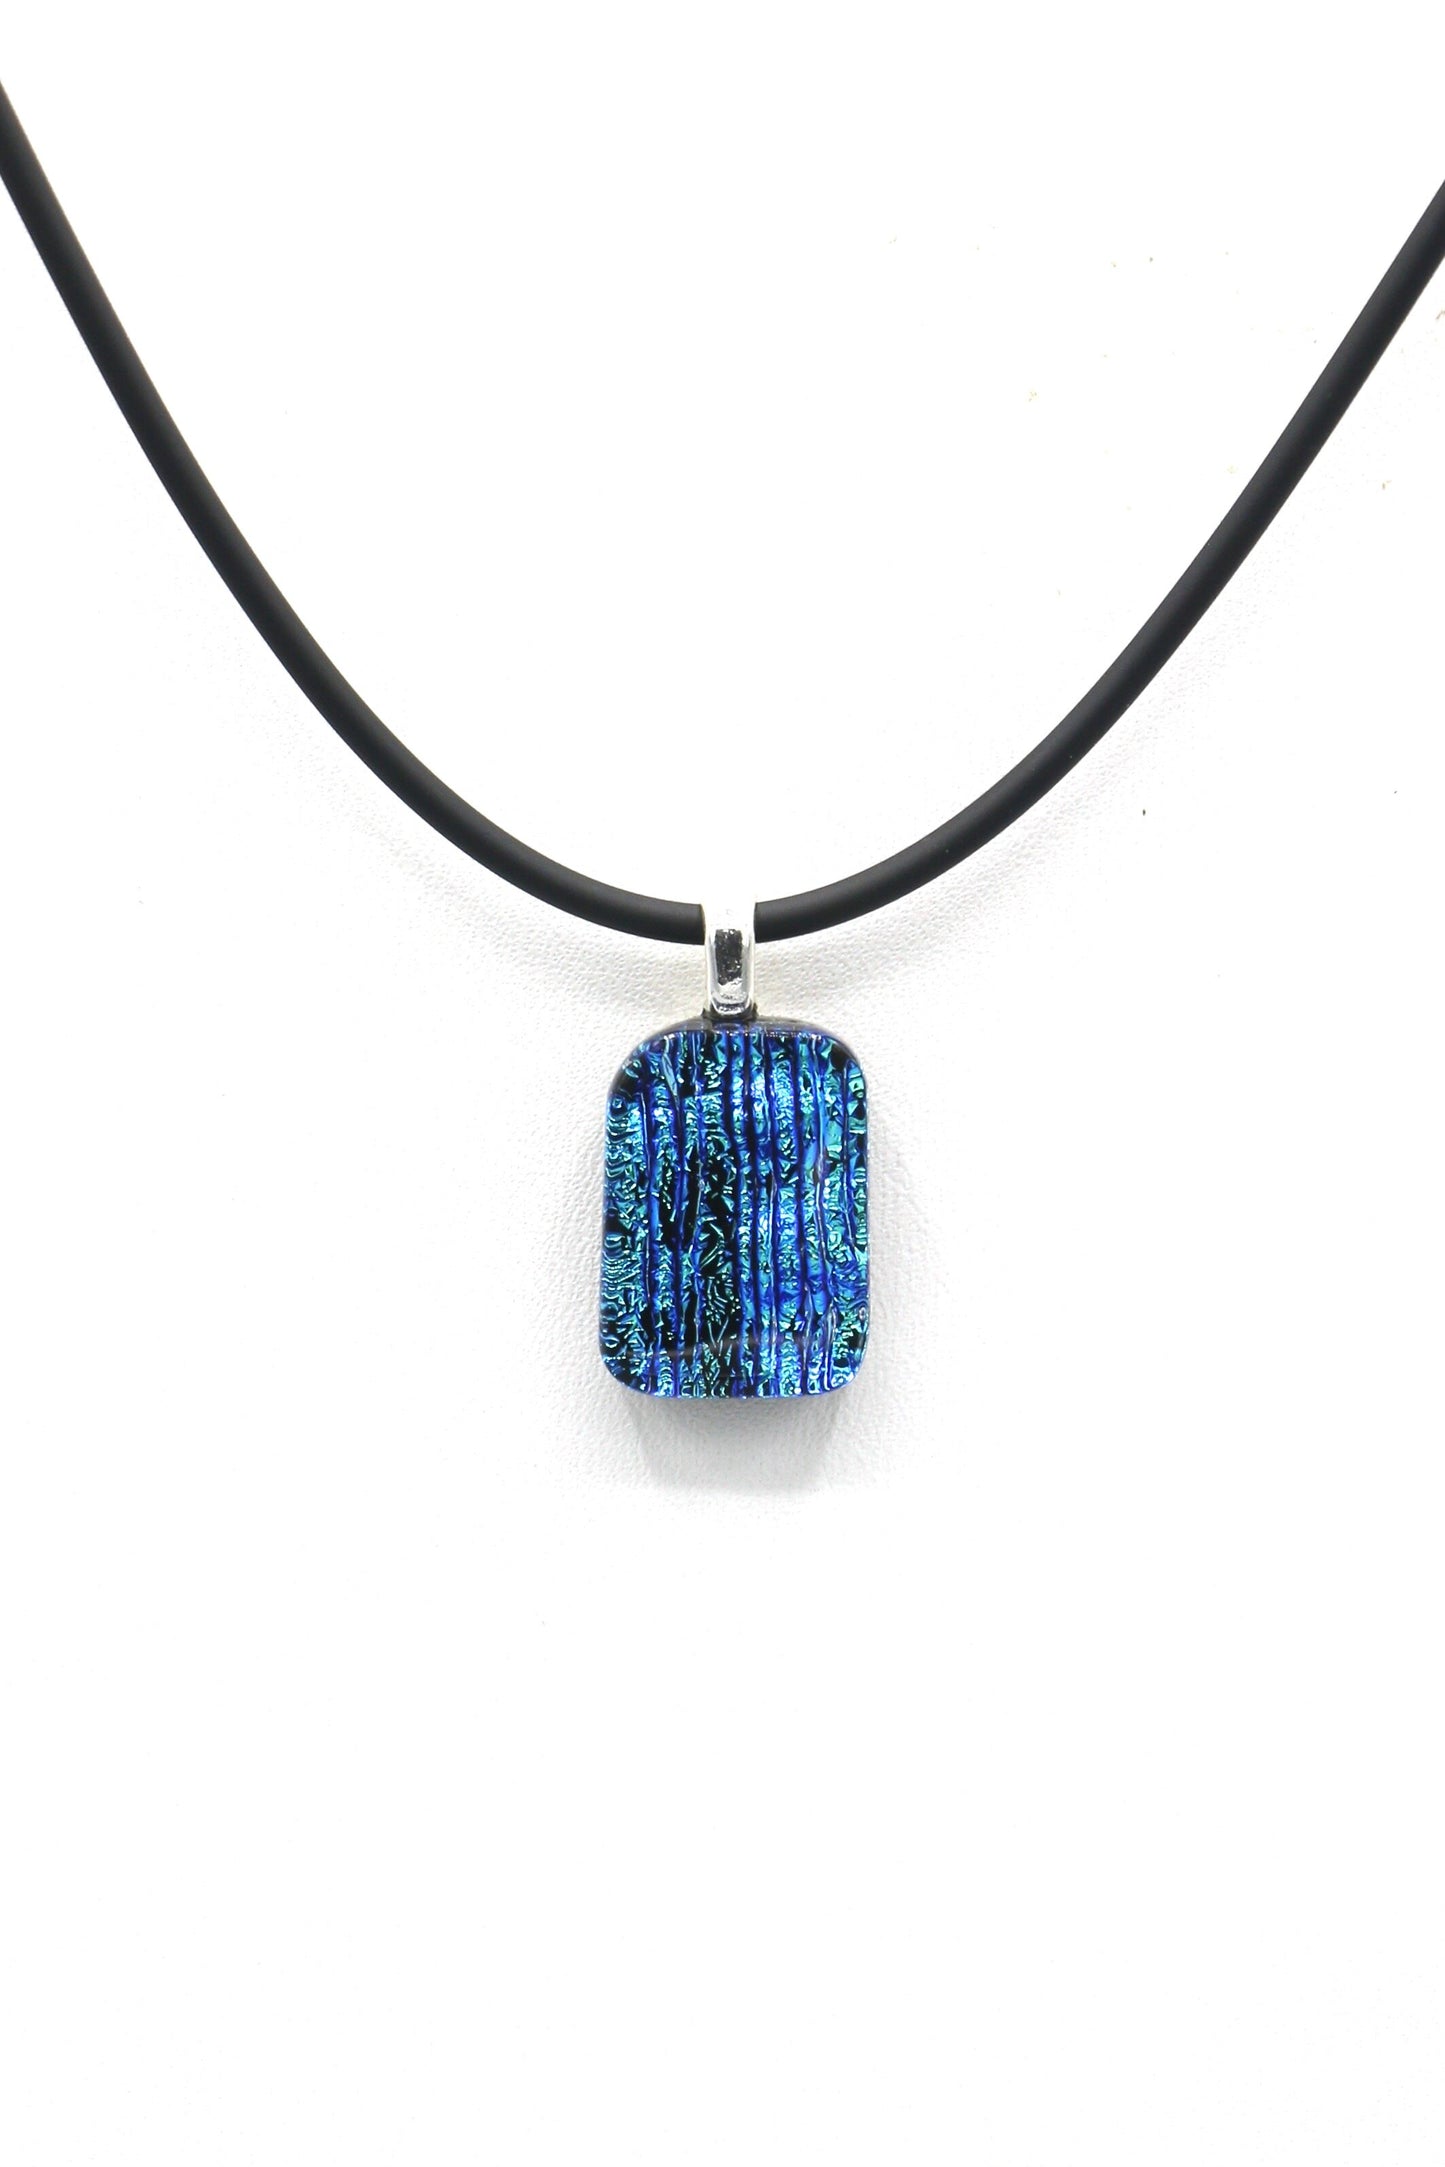 Fused Glass Necklace - 2604